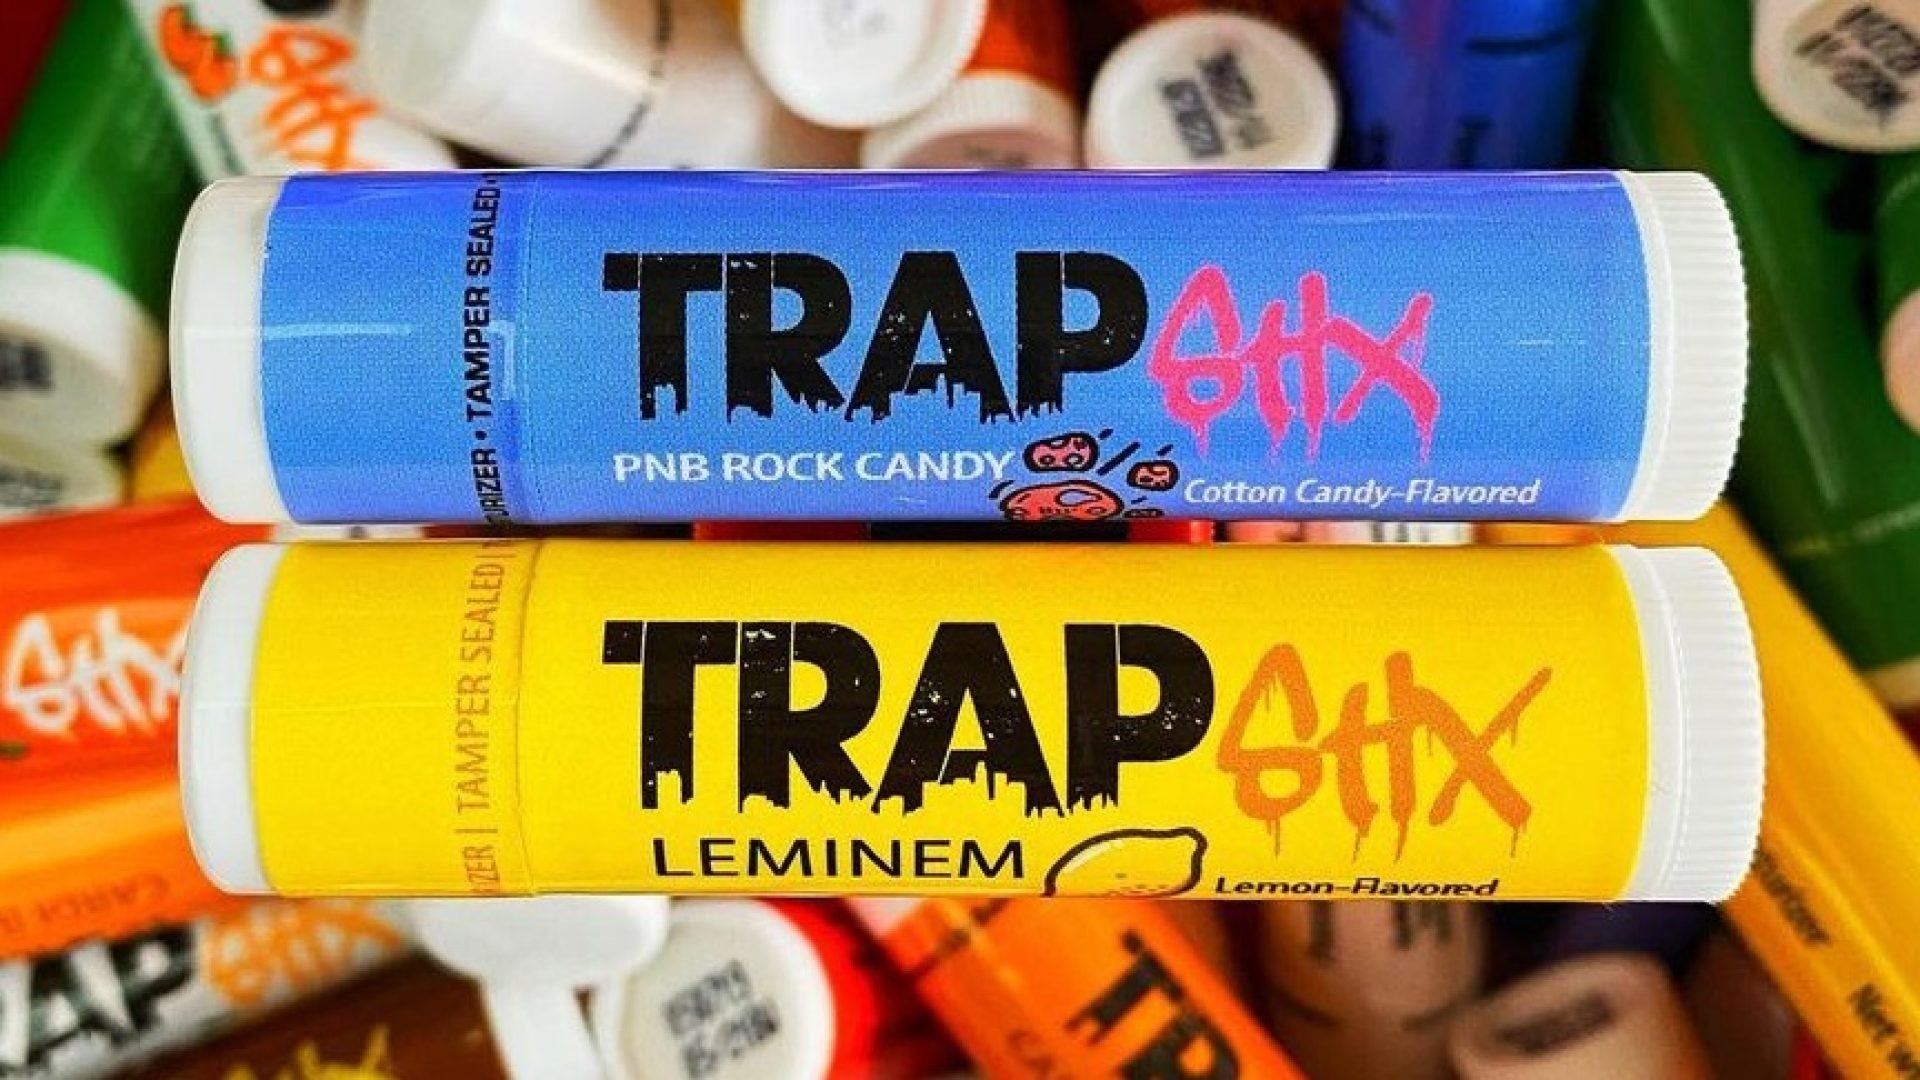 Meet TrapStix: The Emerging Lip Balm Brand Thriving Off Naming Flavors After Your Favorite Music Artists